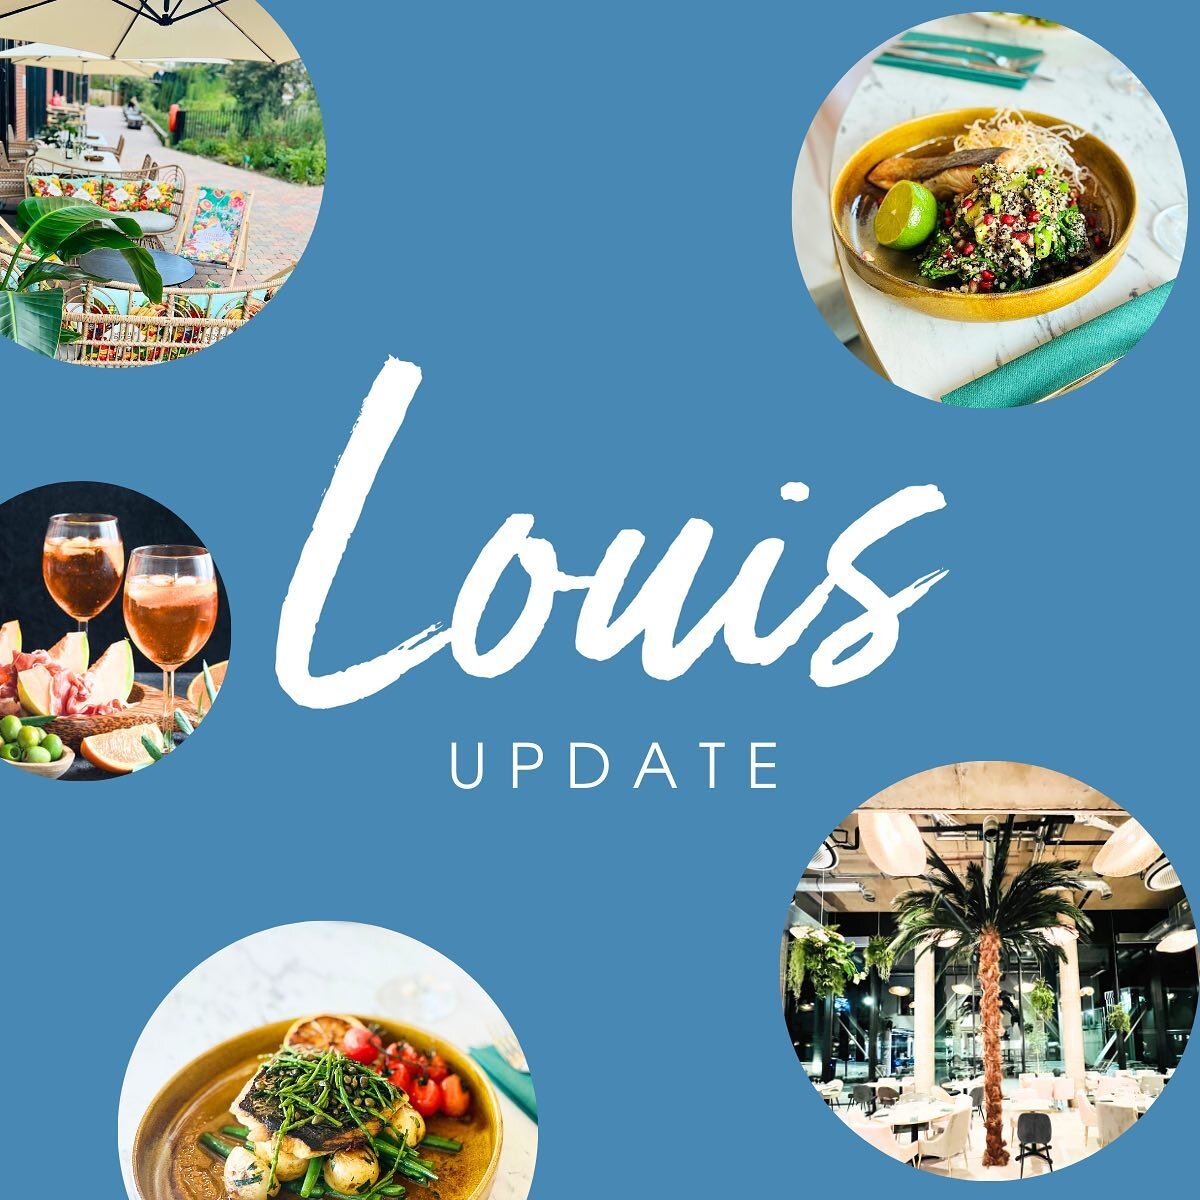 📣 Attention Valued Guests!

First and foremost, thank you for the overwhelming support and feedback during our opening week! Your insights have been invaluable.

In our commitment to providing you with the best dining experience, we've decided to ta